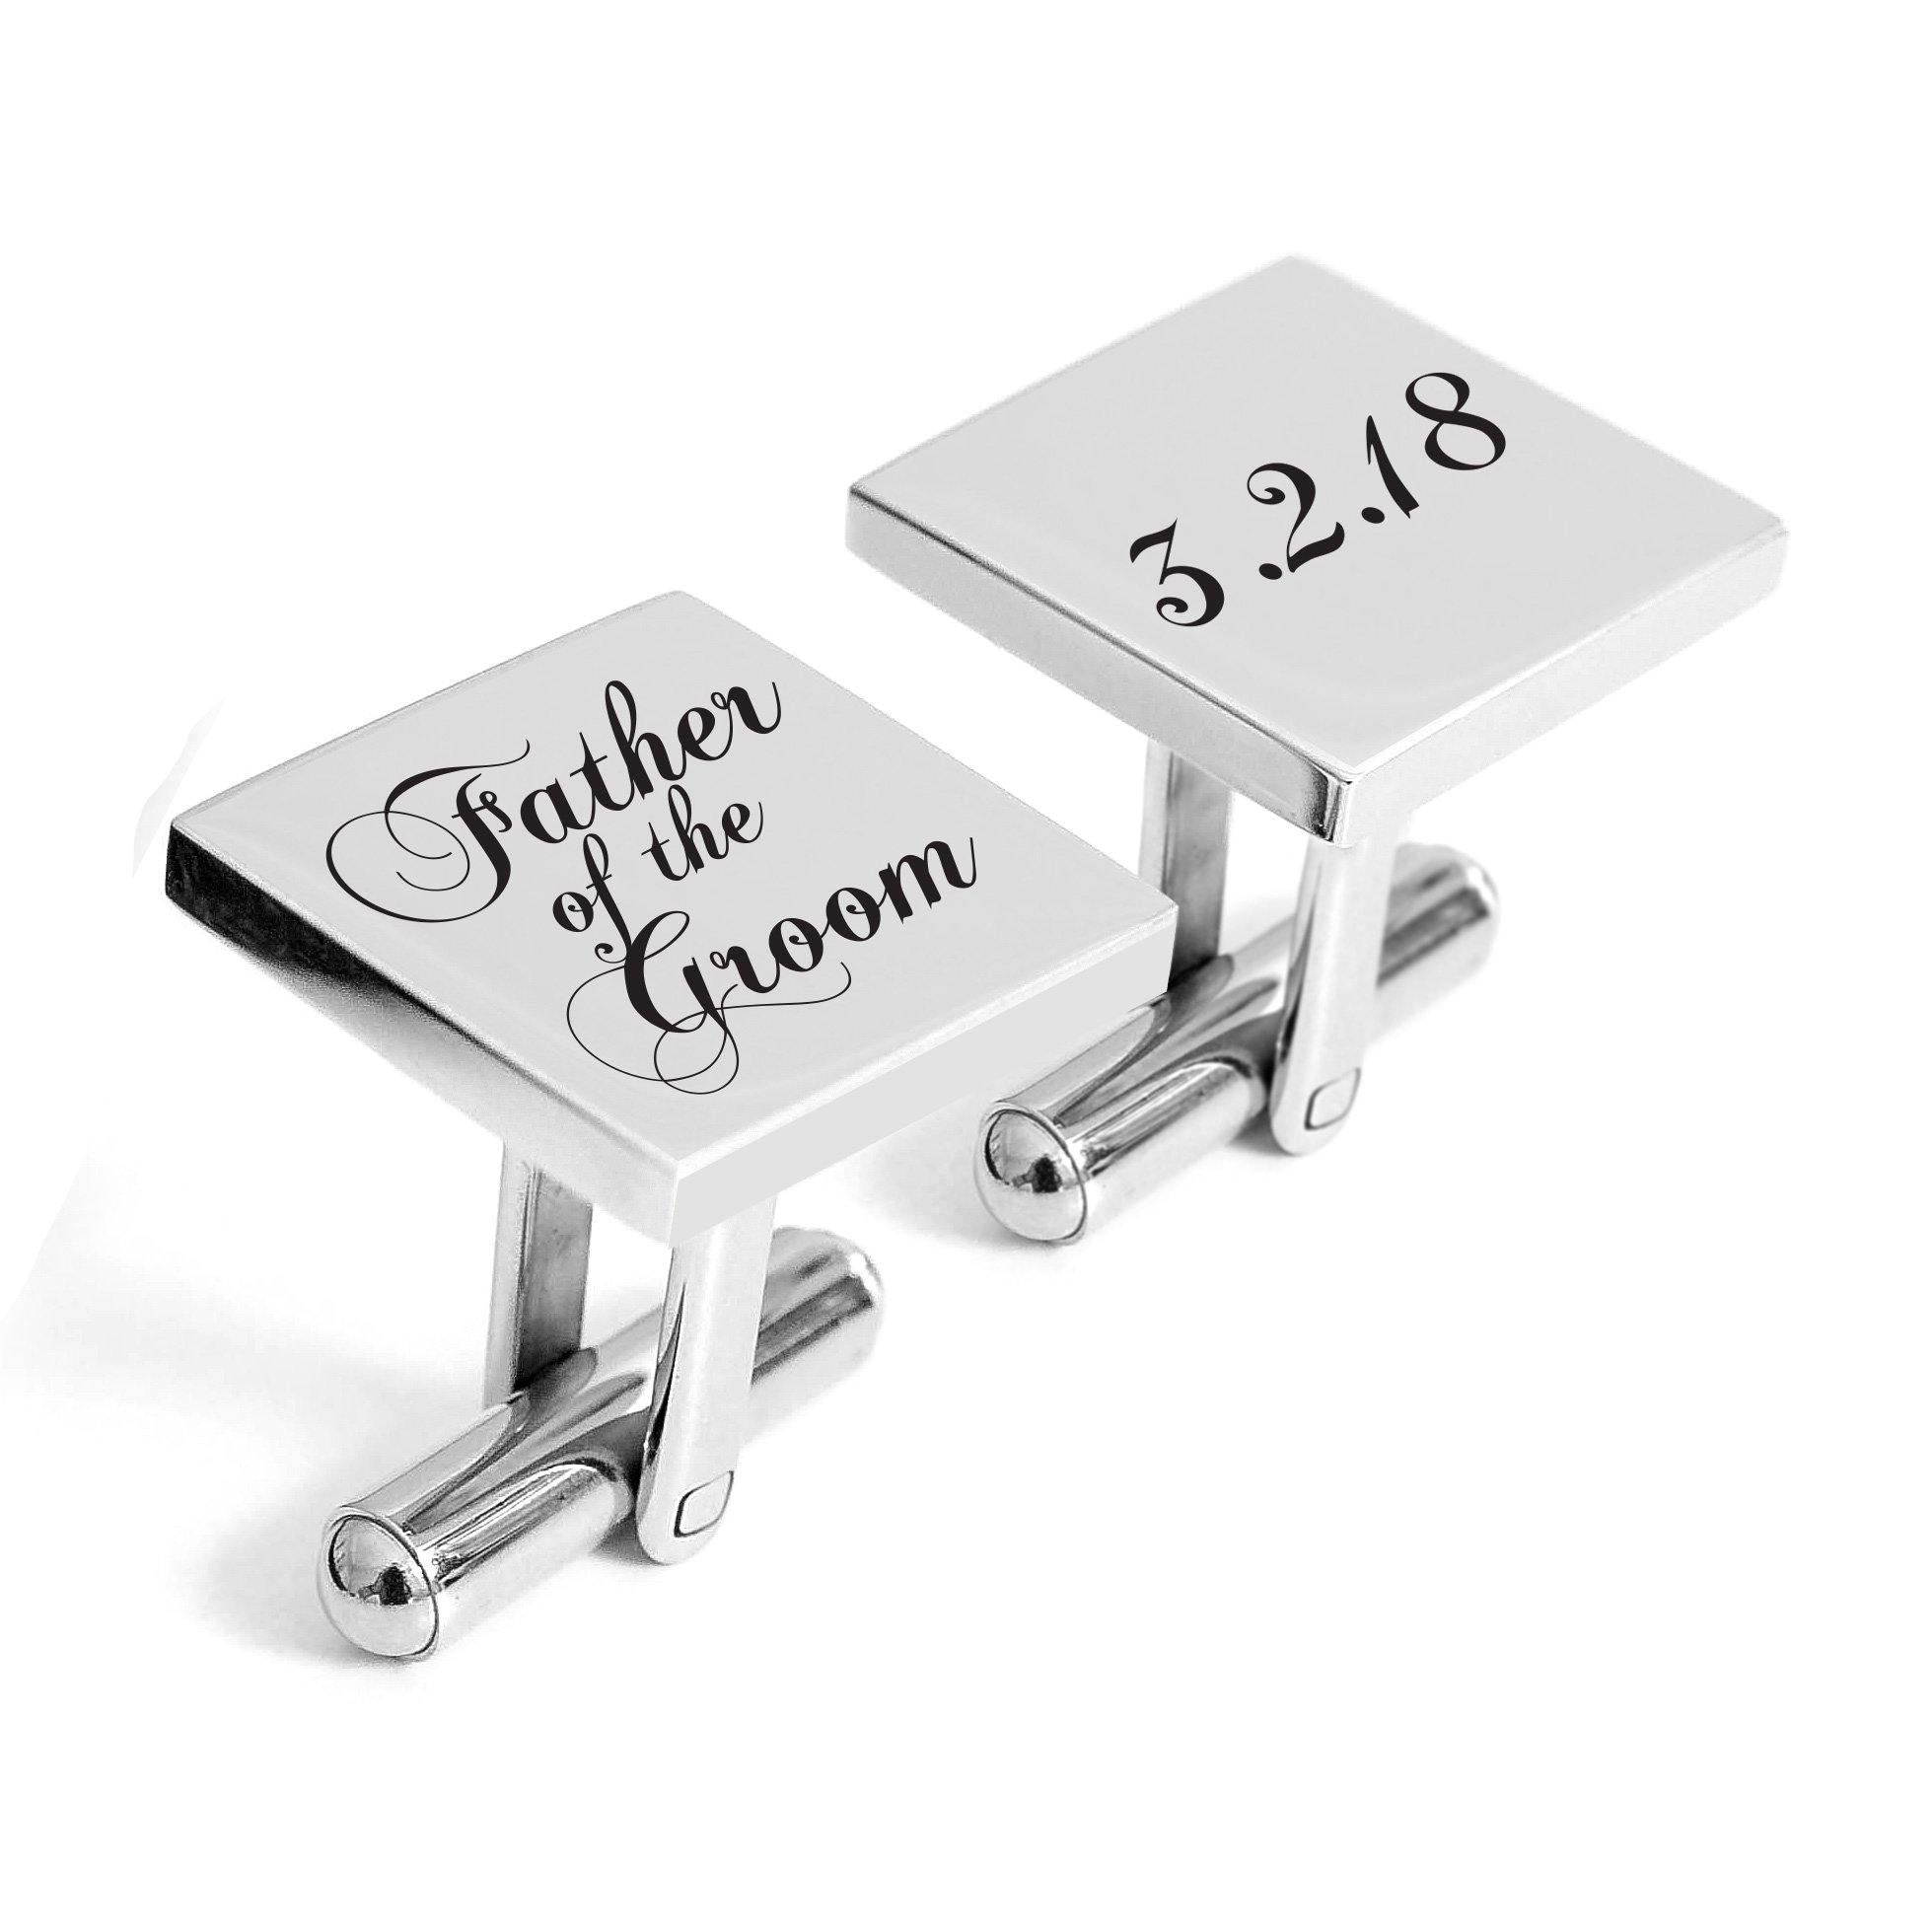 Engraved Father of the Groom cufflinks with wedding date - Alexa Lane